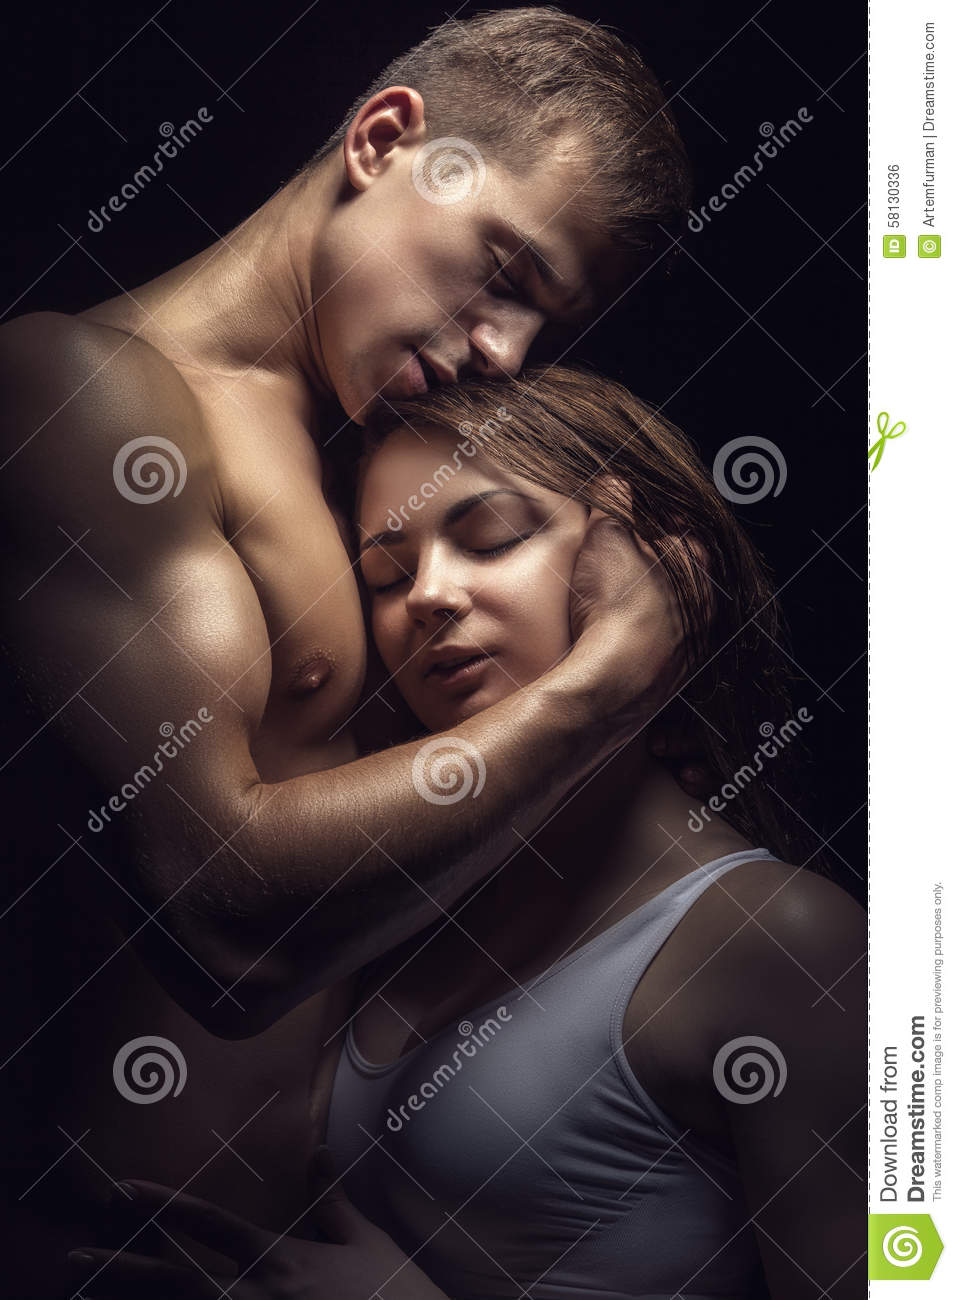 Free photos of couples in erotic foreplay